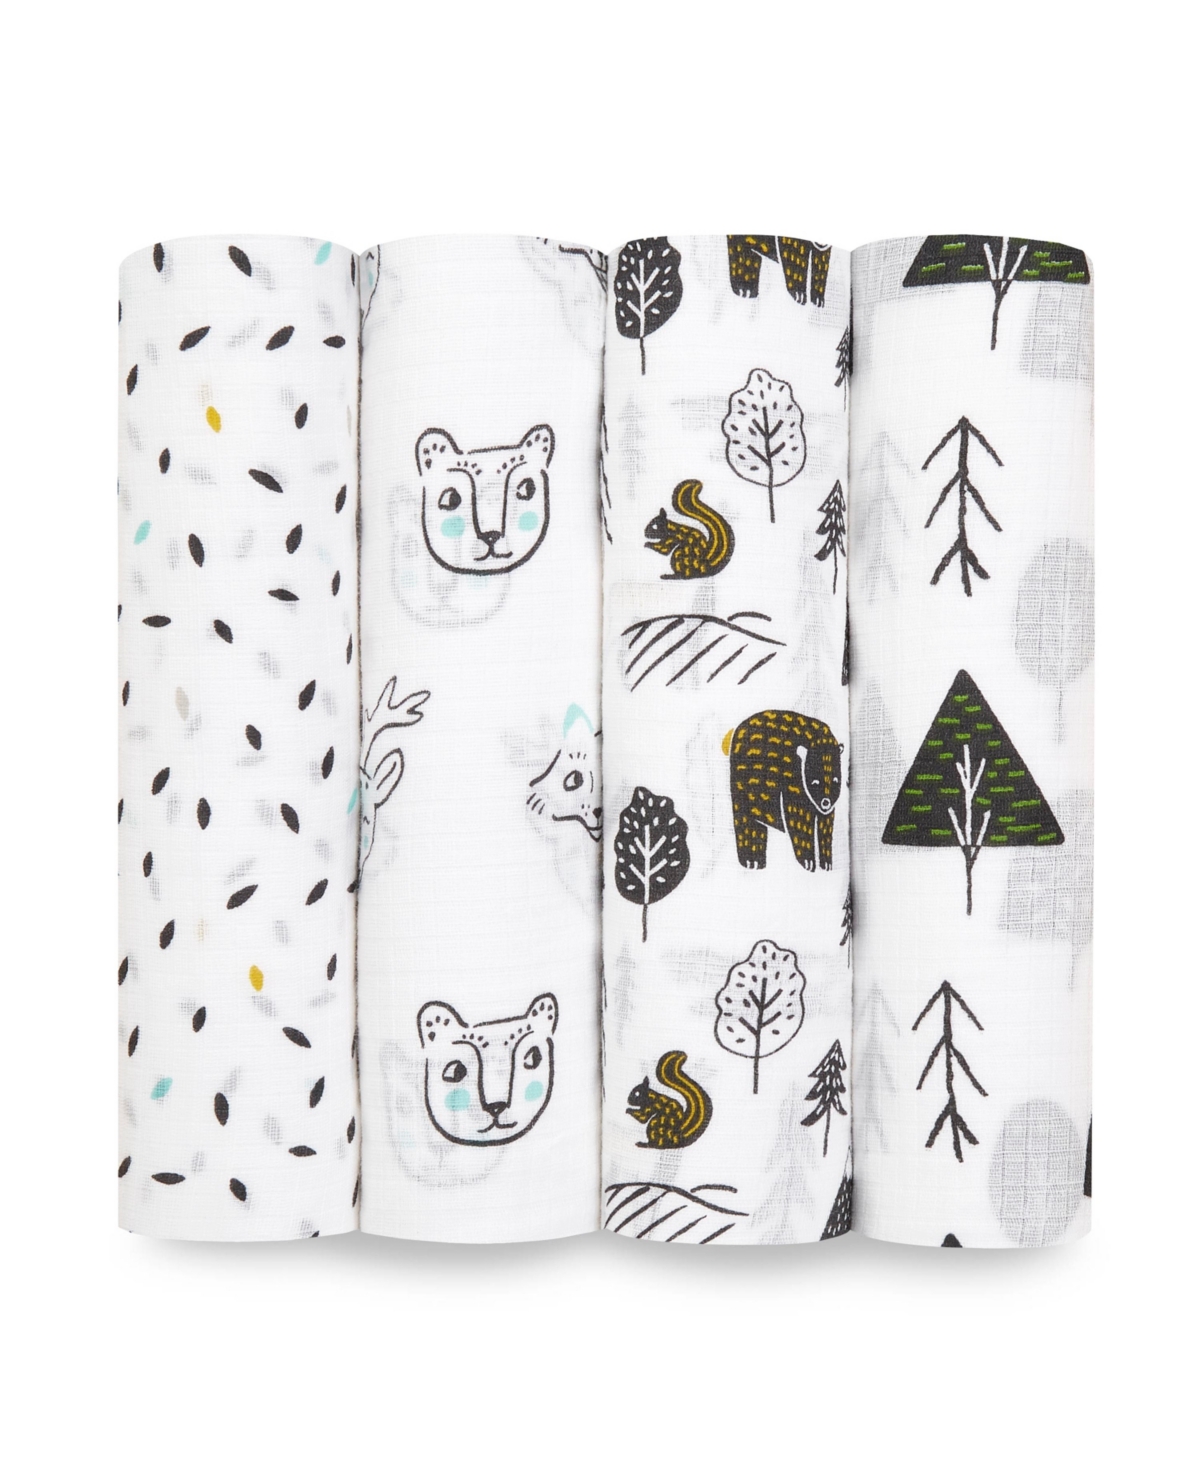 Aden By Aden + Anais Baby Boys Or Baby Girls Swaddle Blankets, Pack Of 4 In Black,white